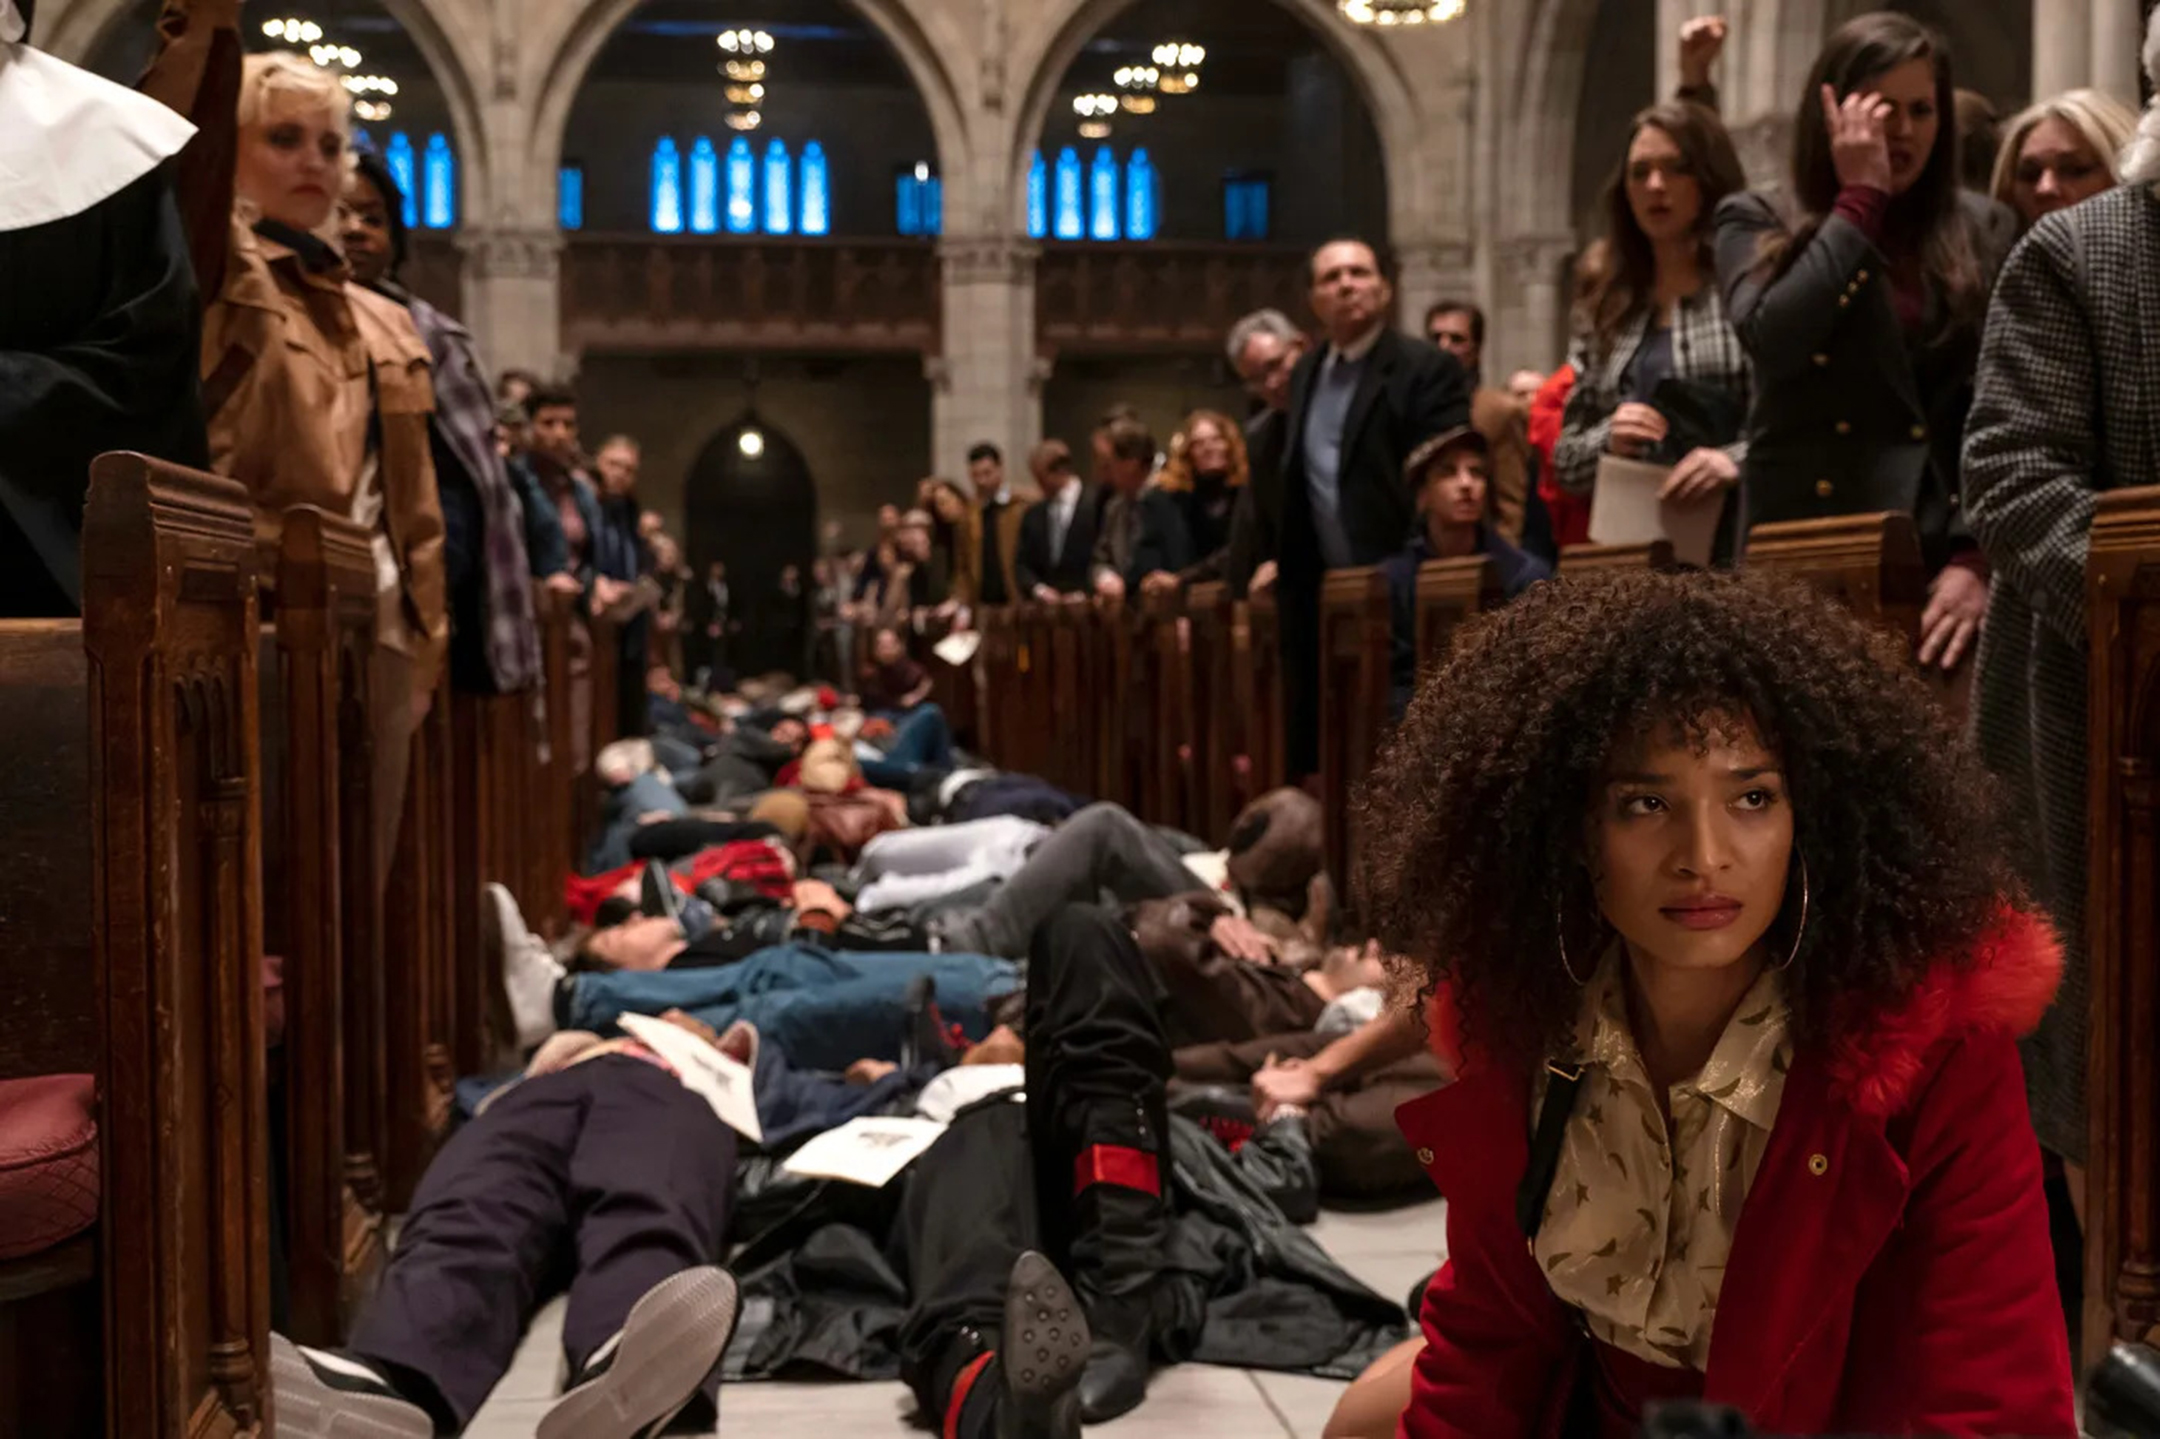 Woman in a red coat sits on the aisle between two rows of church pews, where behind her dozens of people pretend to be dead on the floor while churchgoers in the pews attend mass